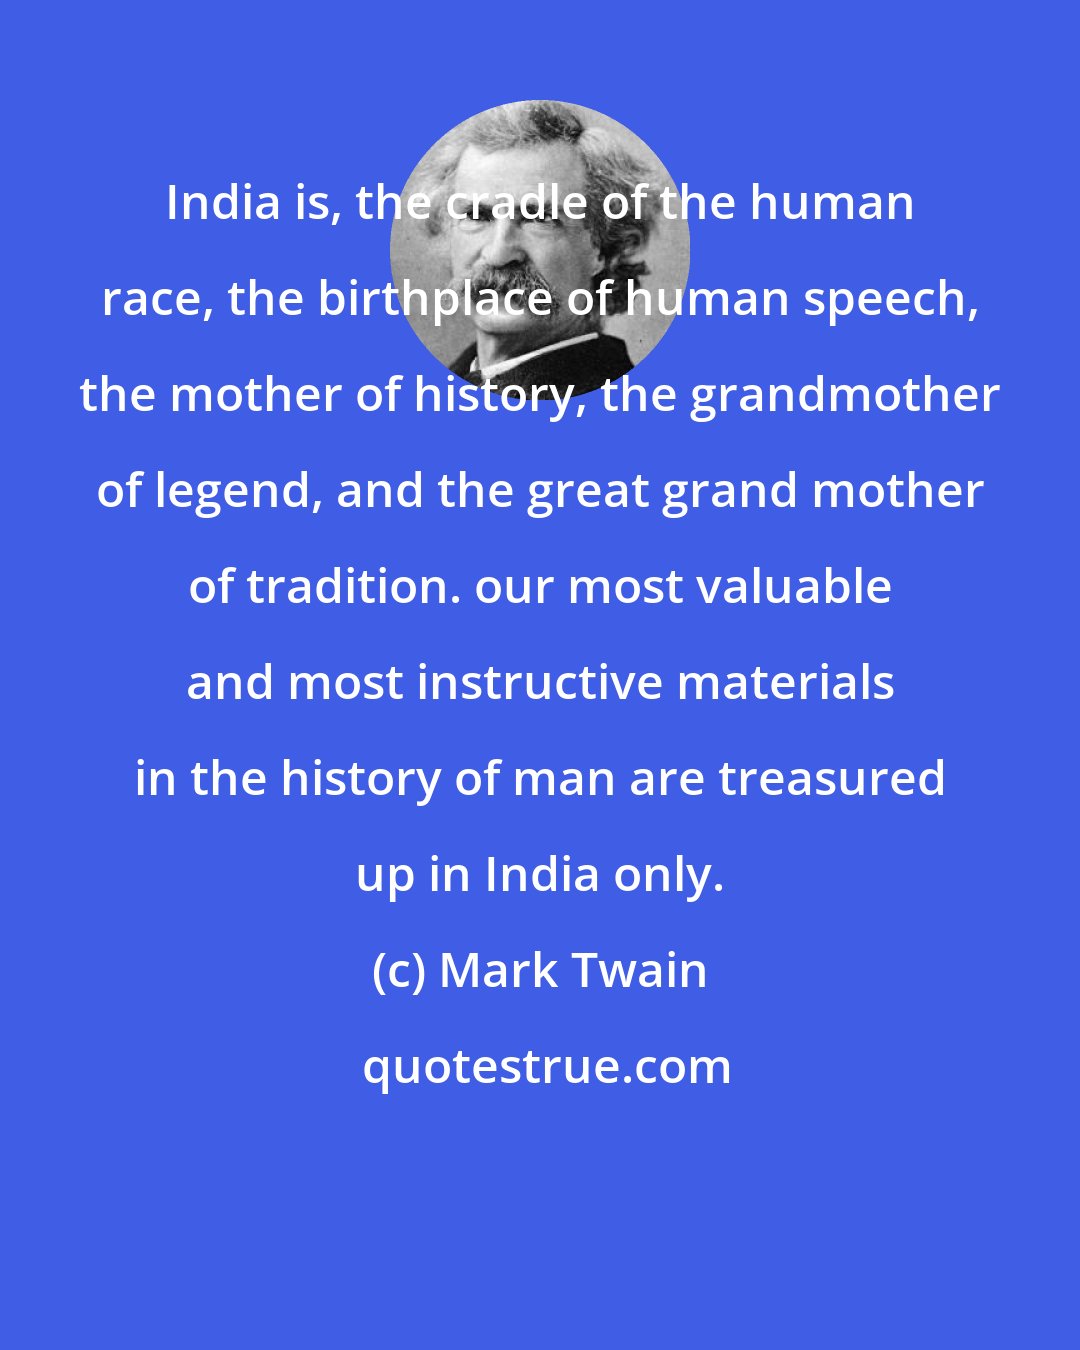 Mark Twain: India is, the cradle of the human race, the birthplace of human speech, the mother of history, the grandmother of legend, and the great grand mother of tradition. our most valuable and most instructive materials in the history of man are treasured up in India only.